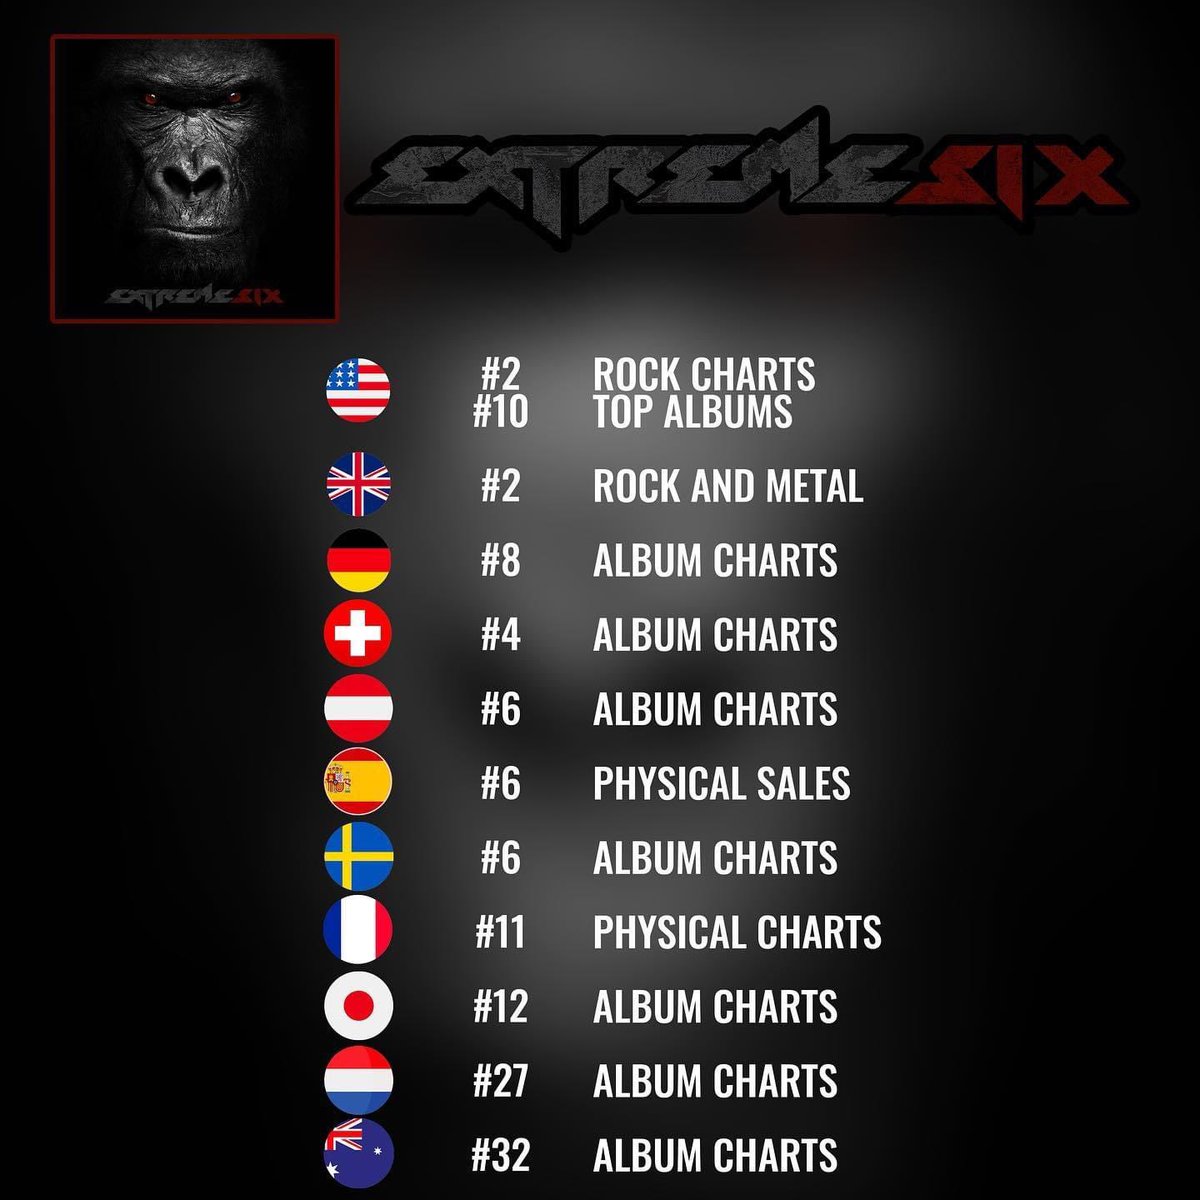 @extreme_band taking charge of and on the RISE in the charts with their new record “SIX”… Thicker Than Blood tour starts in August here in the U S then we travel to Australia, Japan, UK and Europe #extremeband #livemusic #travelforwork @garycherone @nunobettencourt